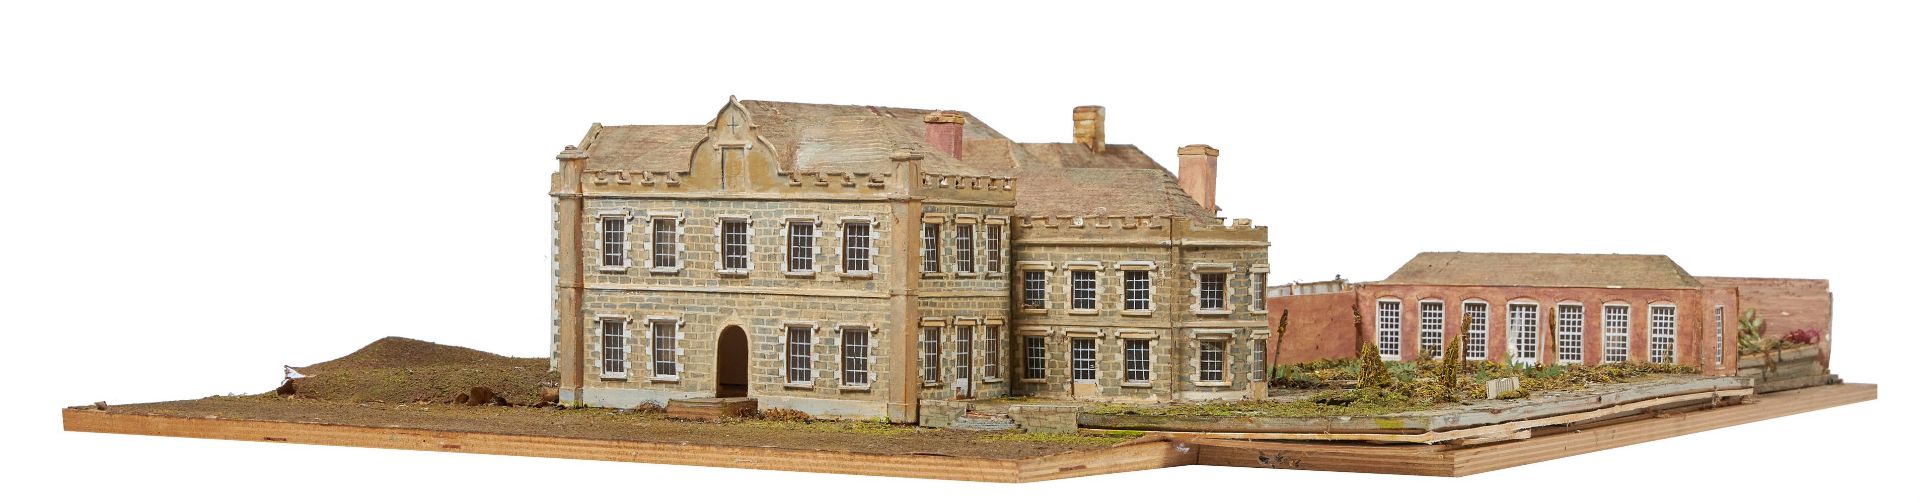 AN ARCHITECTURAL MODEL OF FLAXLEY ABBEY, BY OLIVER MESSEL - Image 15 of 34